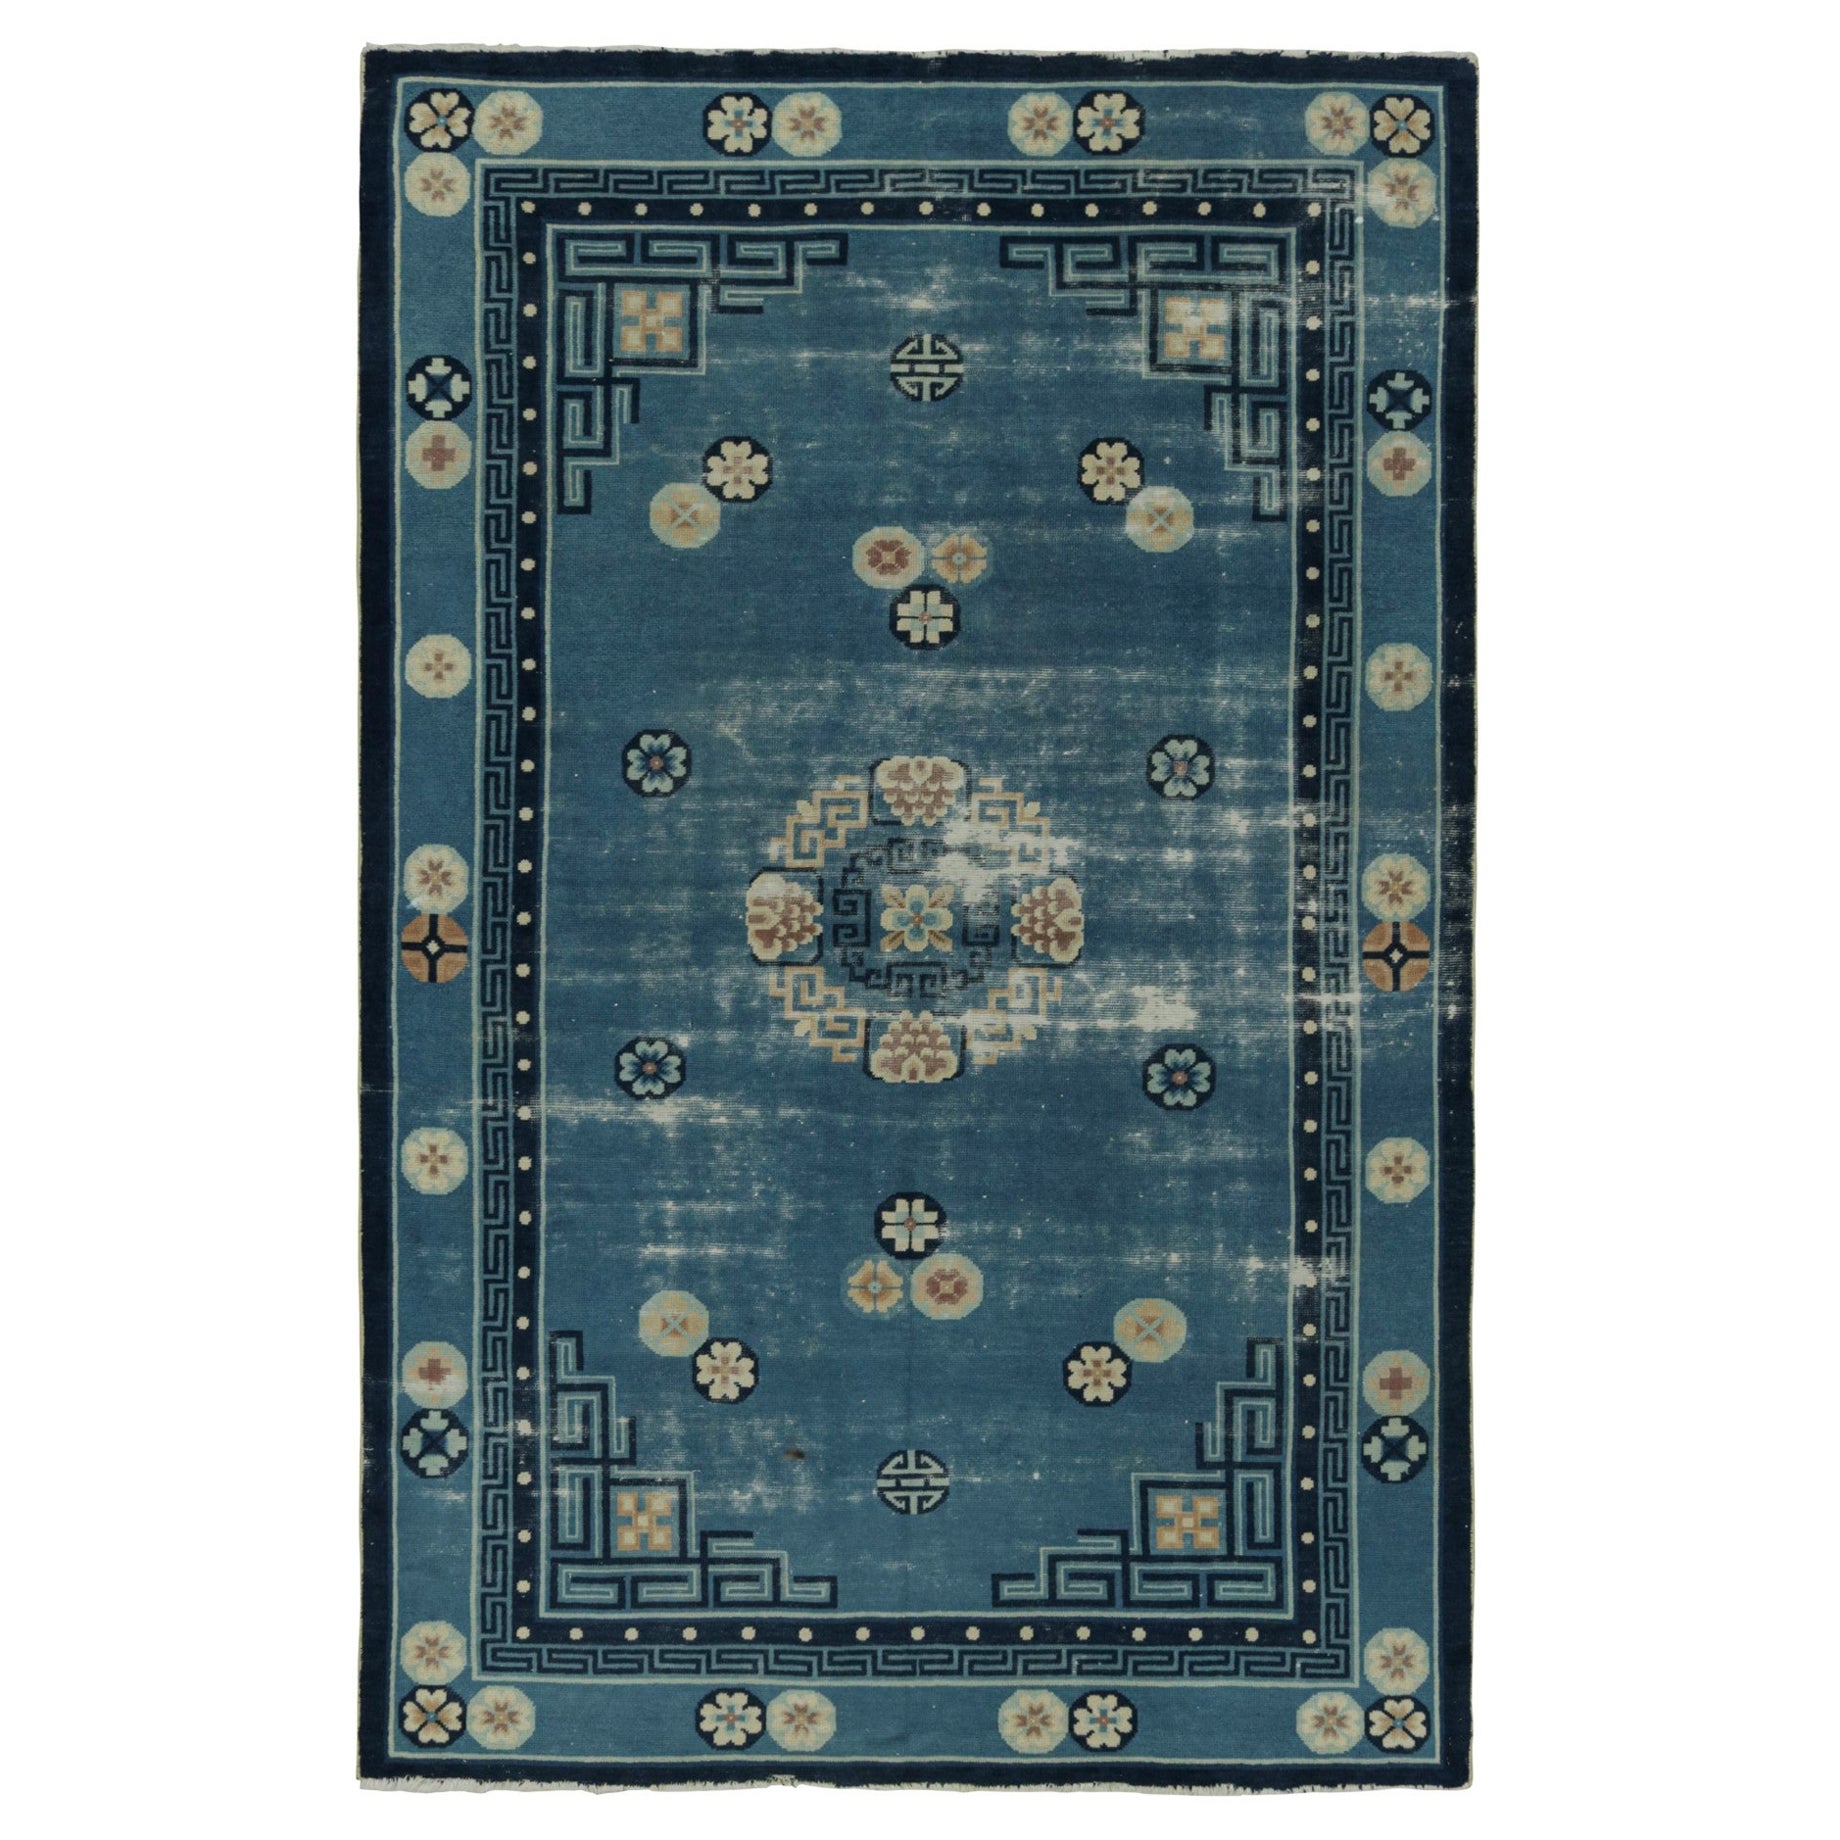 Blue Antique Chinese Peking Art Deco Rug with Floral Patterns, from Rug & Kilim